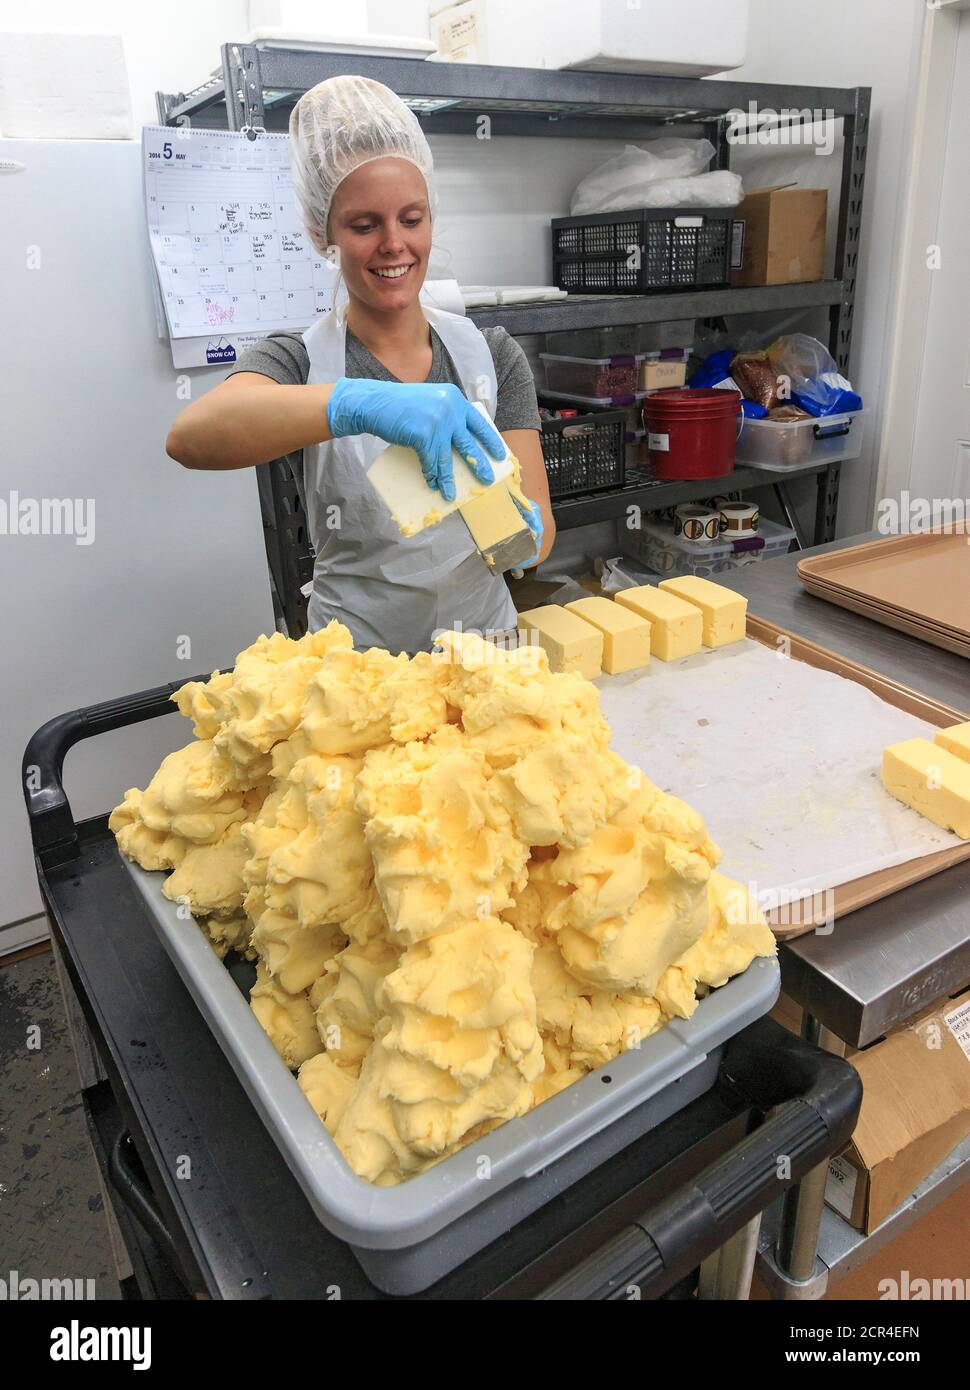 Packing butter into one-pound forms at Golden Ears Cheese Crafters, selling butter, cheese, baked goods and crafts. The dairy products are made on site using milk from the family own dairy cows. Located in Maple Ridge, British Columbia, Canada, south of Vancouver at the Canada-US border. Stock Photo